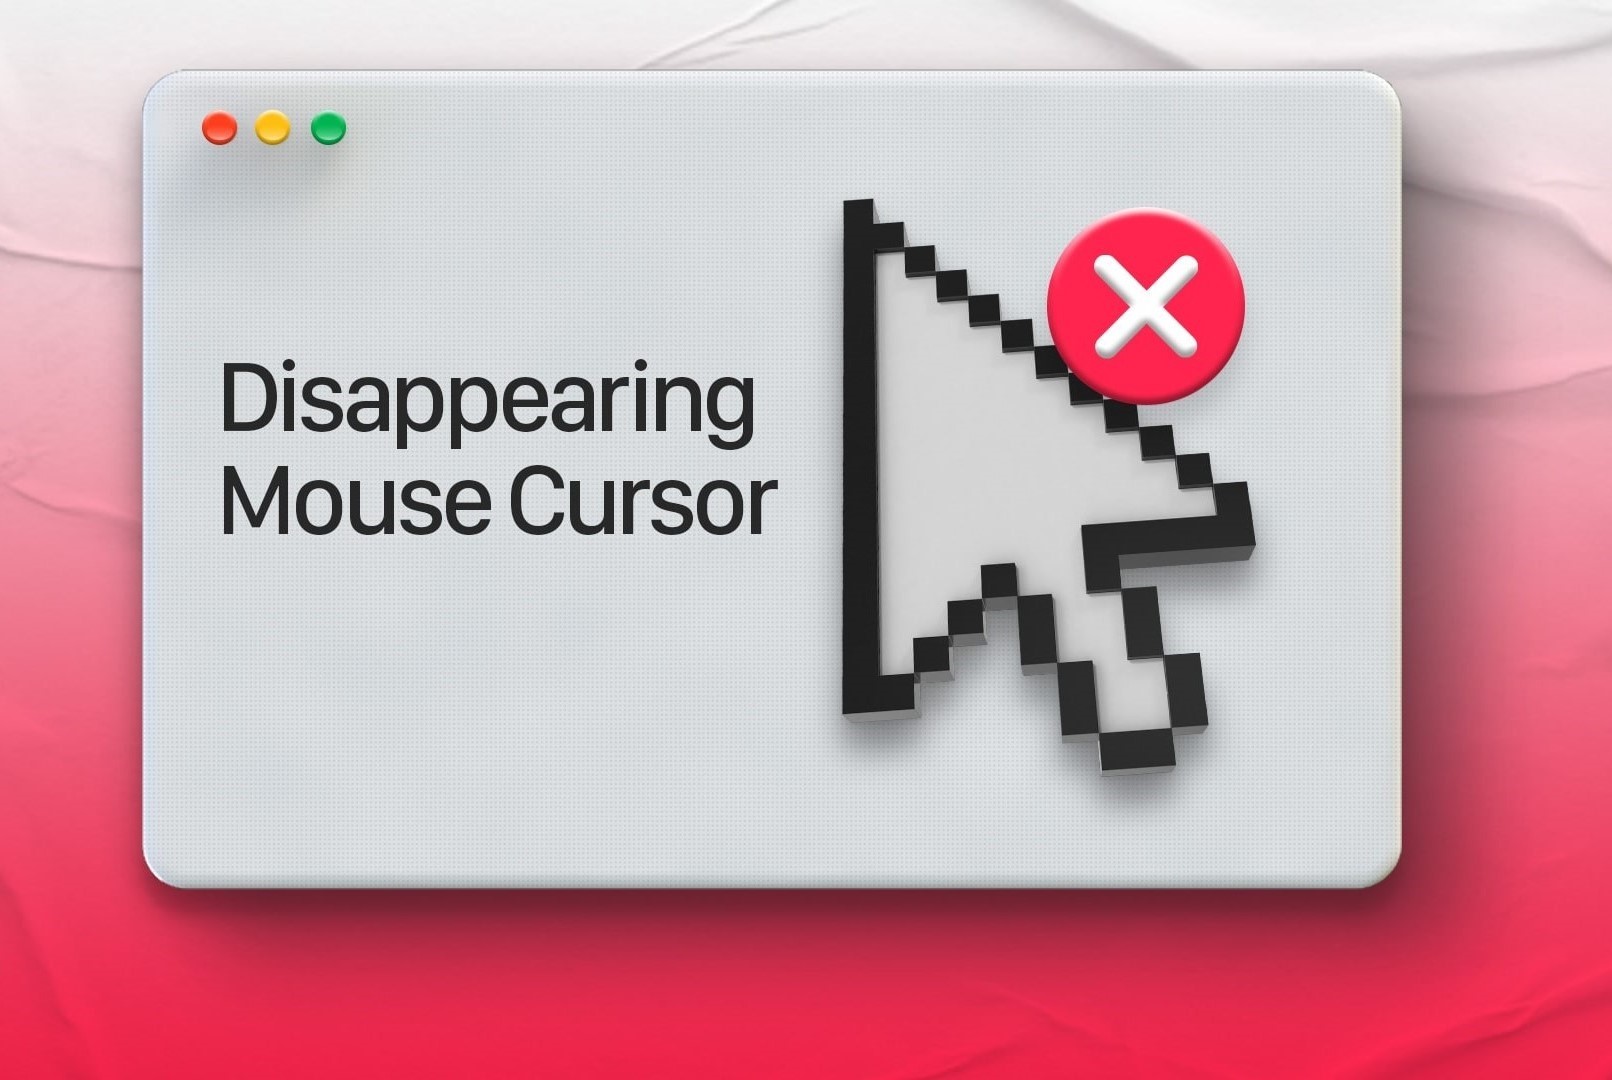 How To Fix A Lost Mouse On A Mac